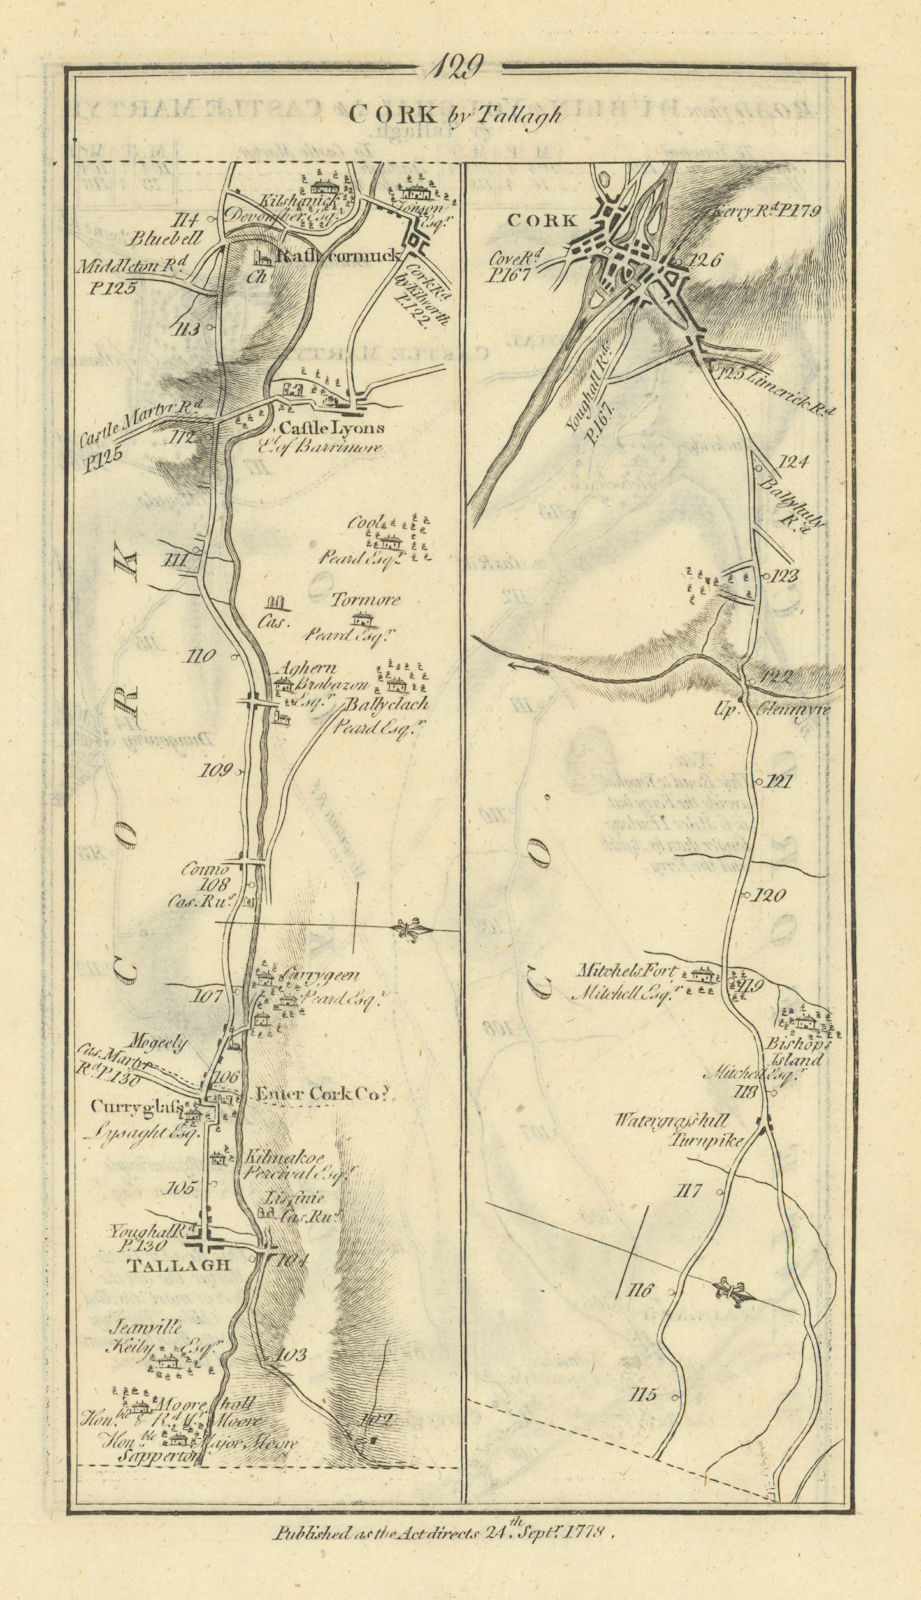 Associate Product #129 Cork by Tallagh. Rathcormac Castlelyons Tallow. TAYLOR/SKINNER 1778 map